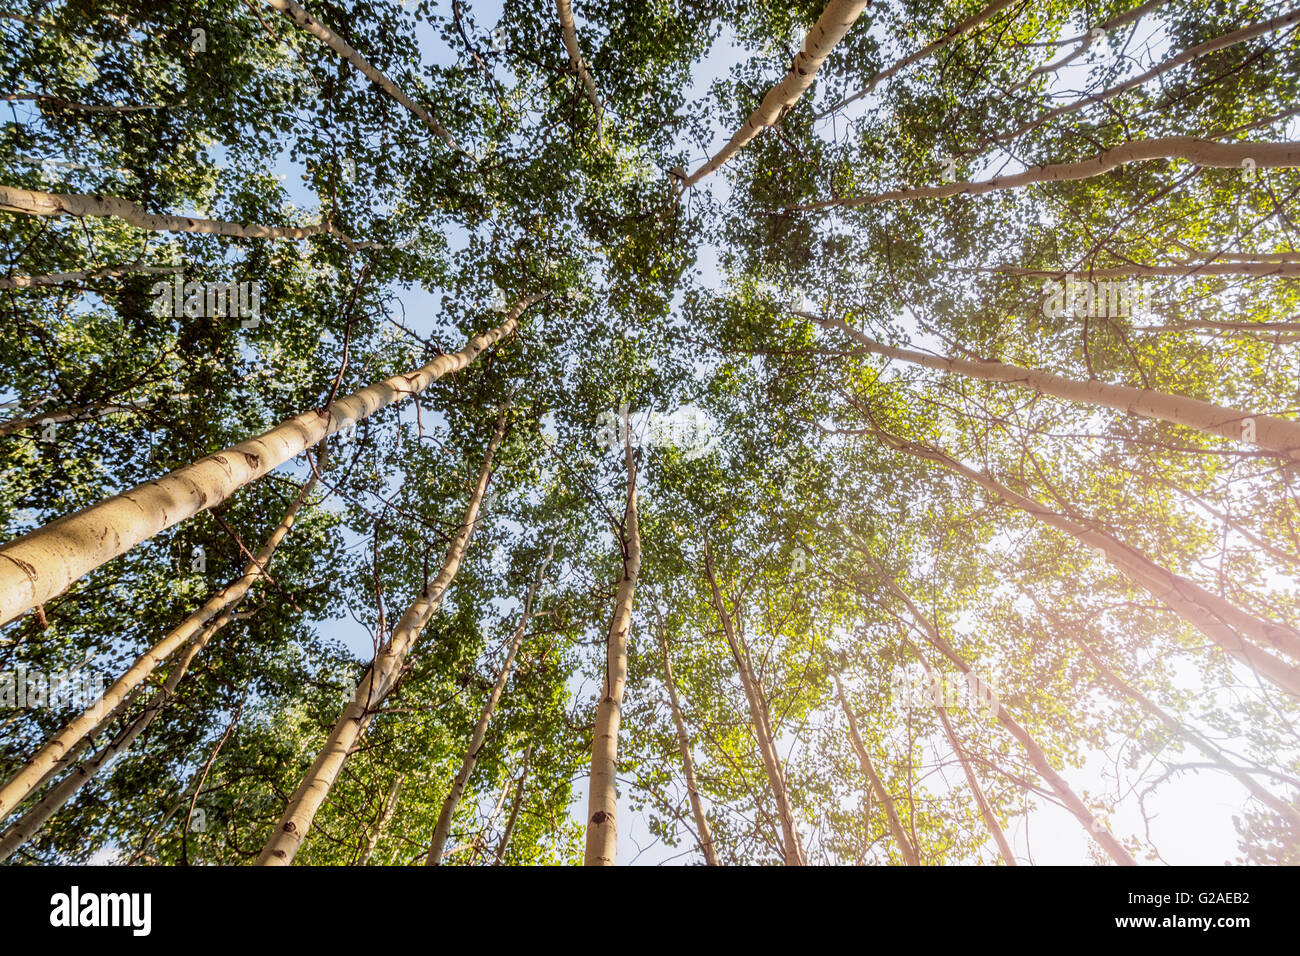 Aspen trees in forest Stock Photo